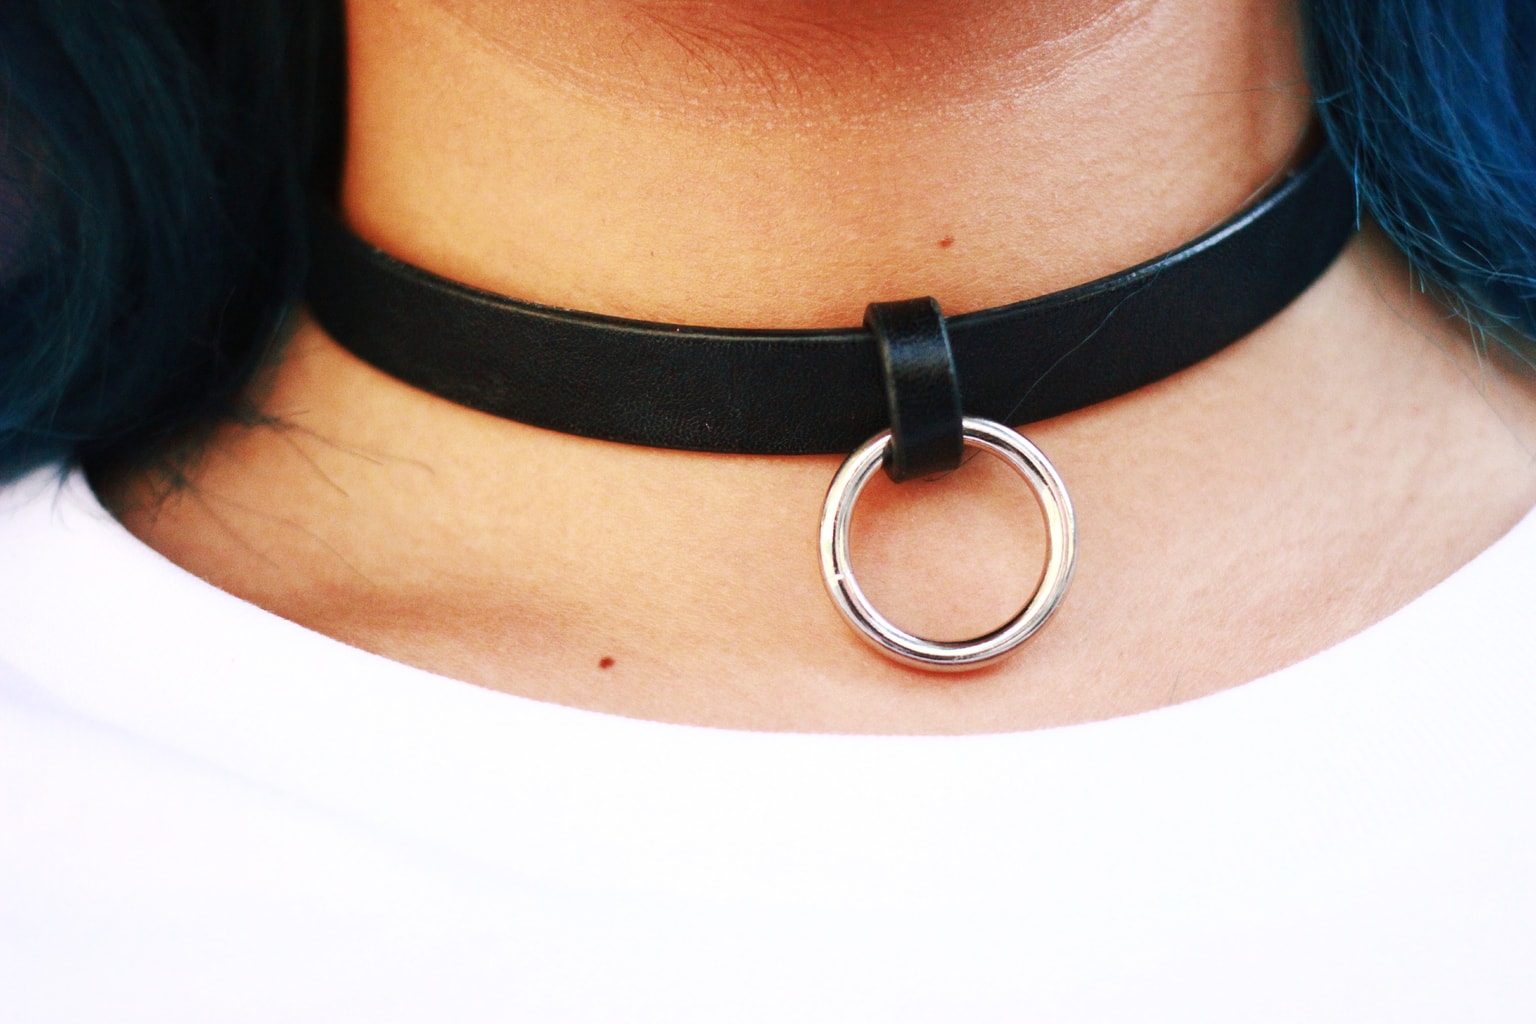 Leather choker with ring spotted in NYC.